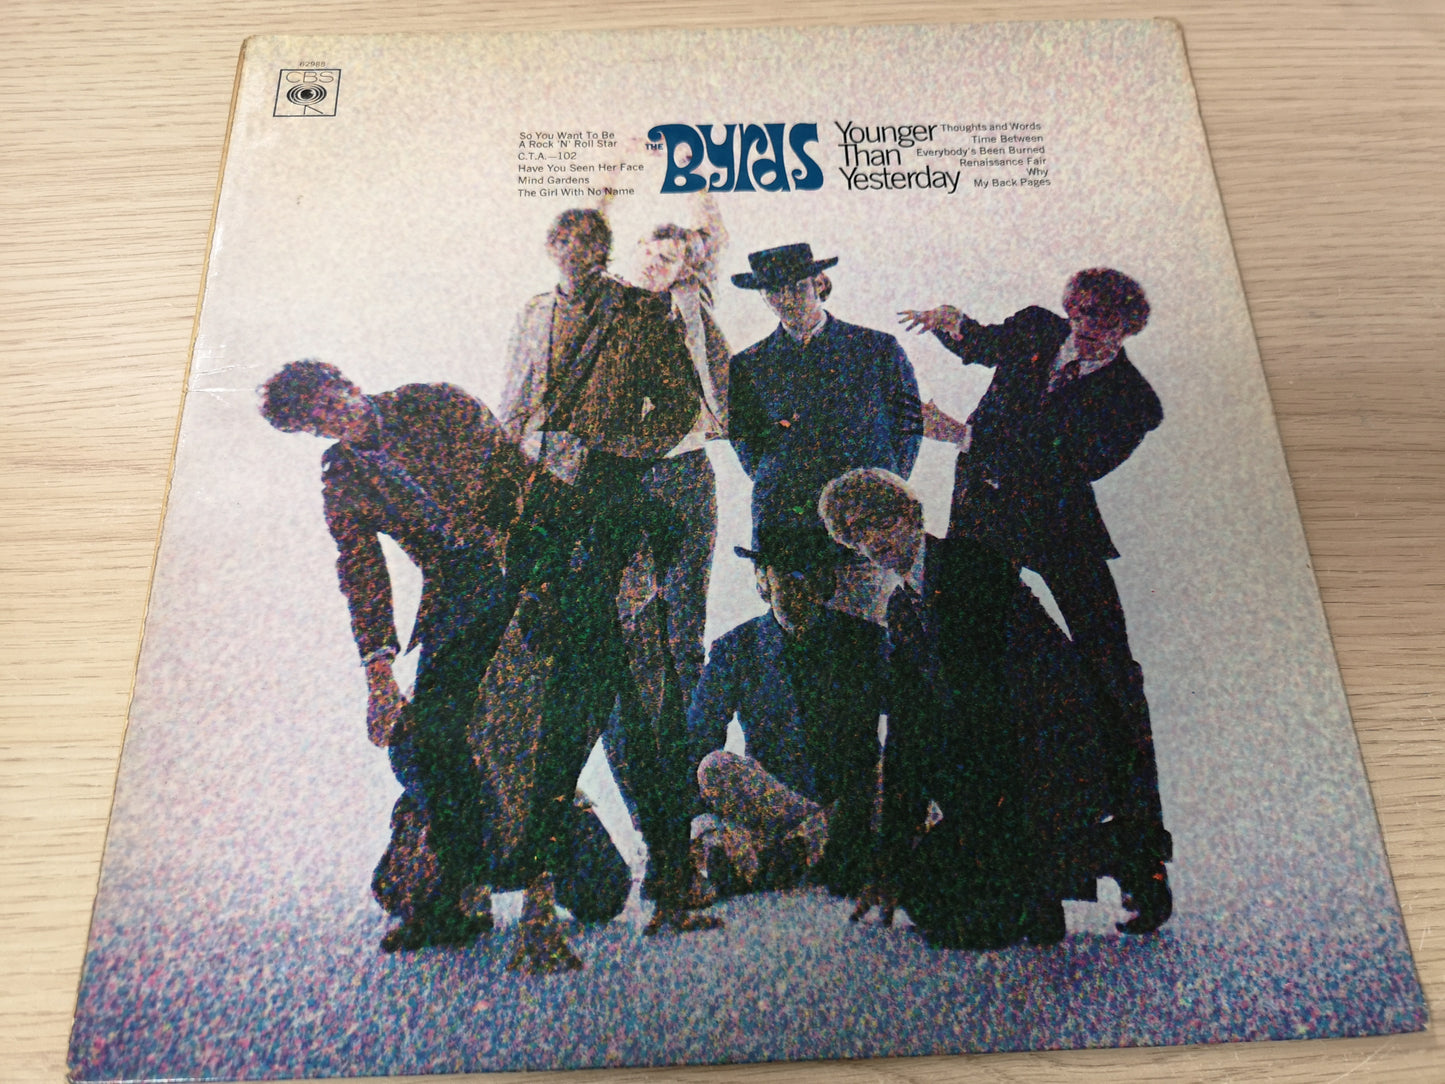 Byrds "Younger than Yesterday" Orig UK Stereo 1967 VG++/M-